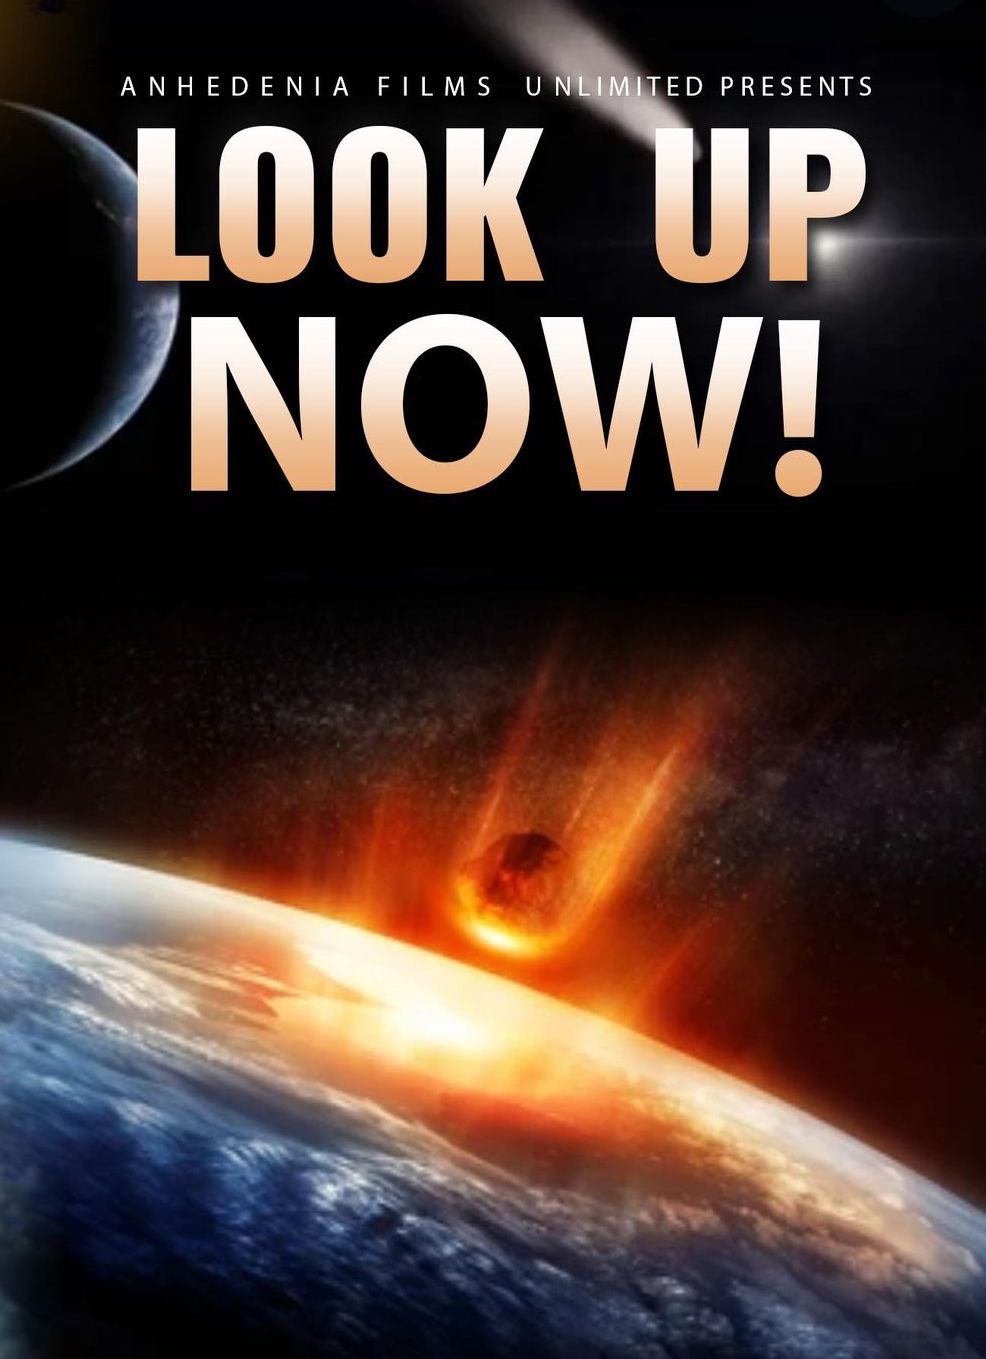 Look Up Now! DVD